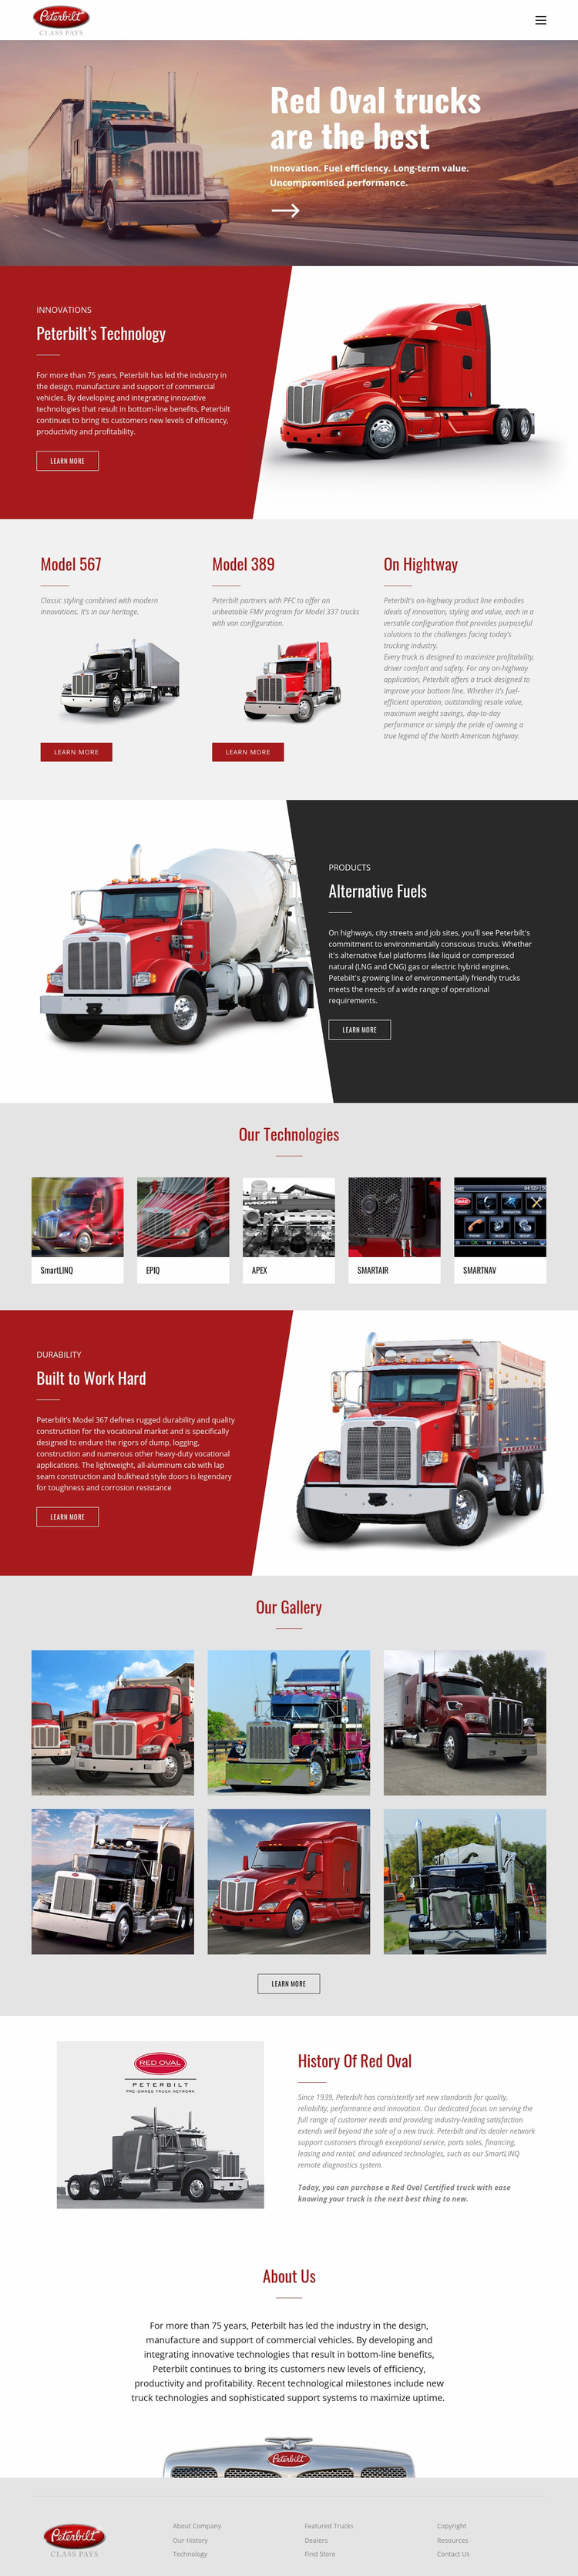 Red oval truck transportaion Wix Template Alternative